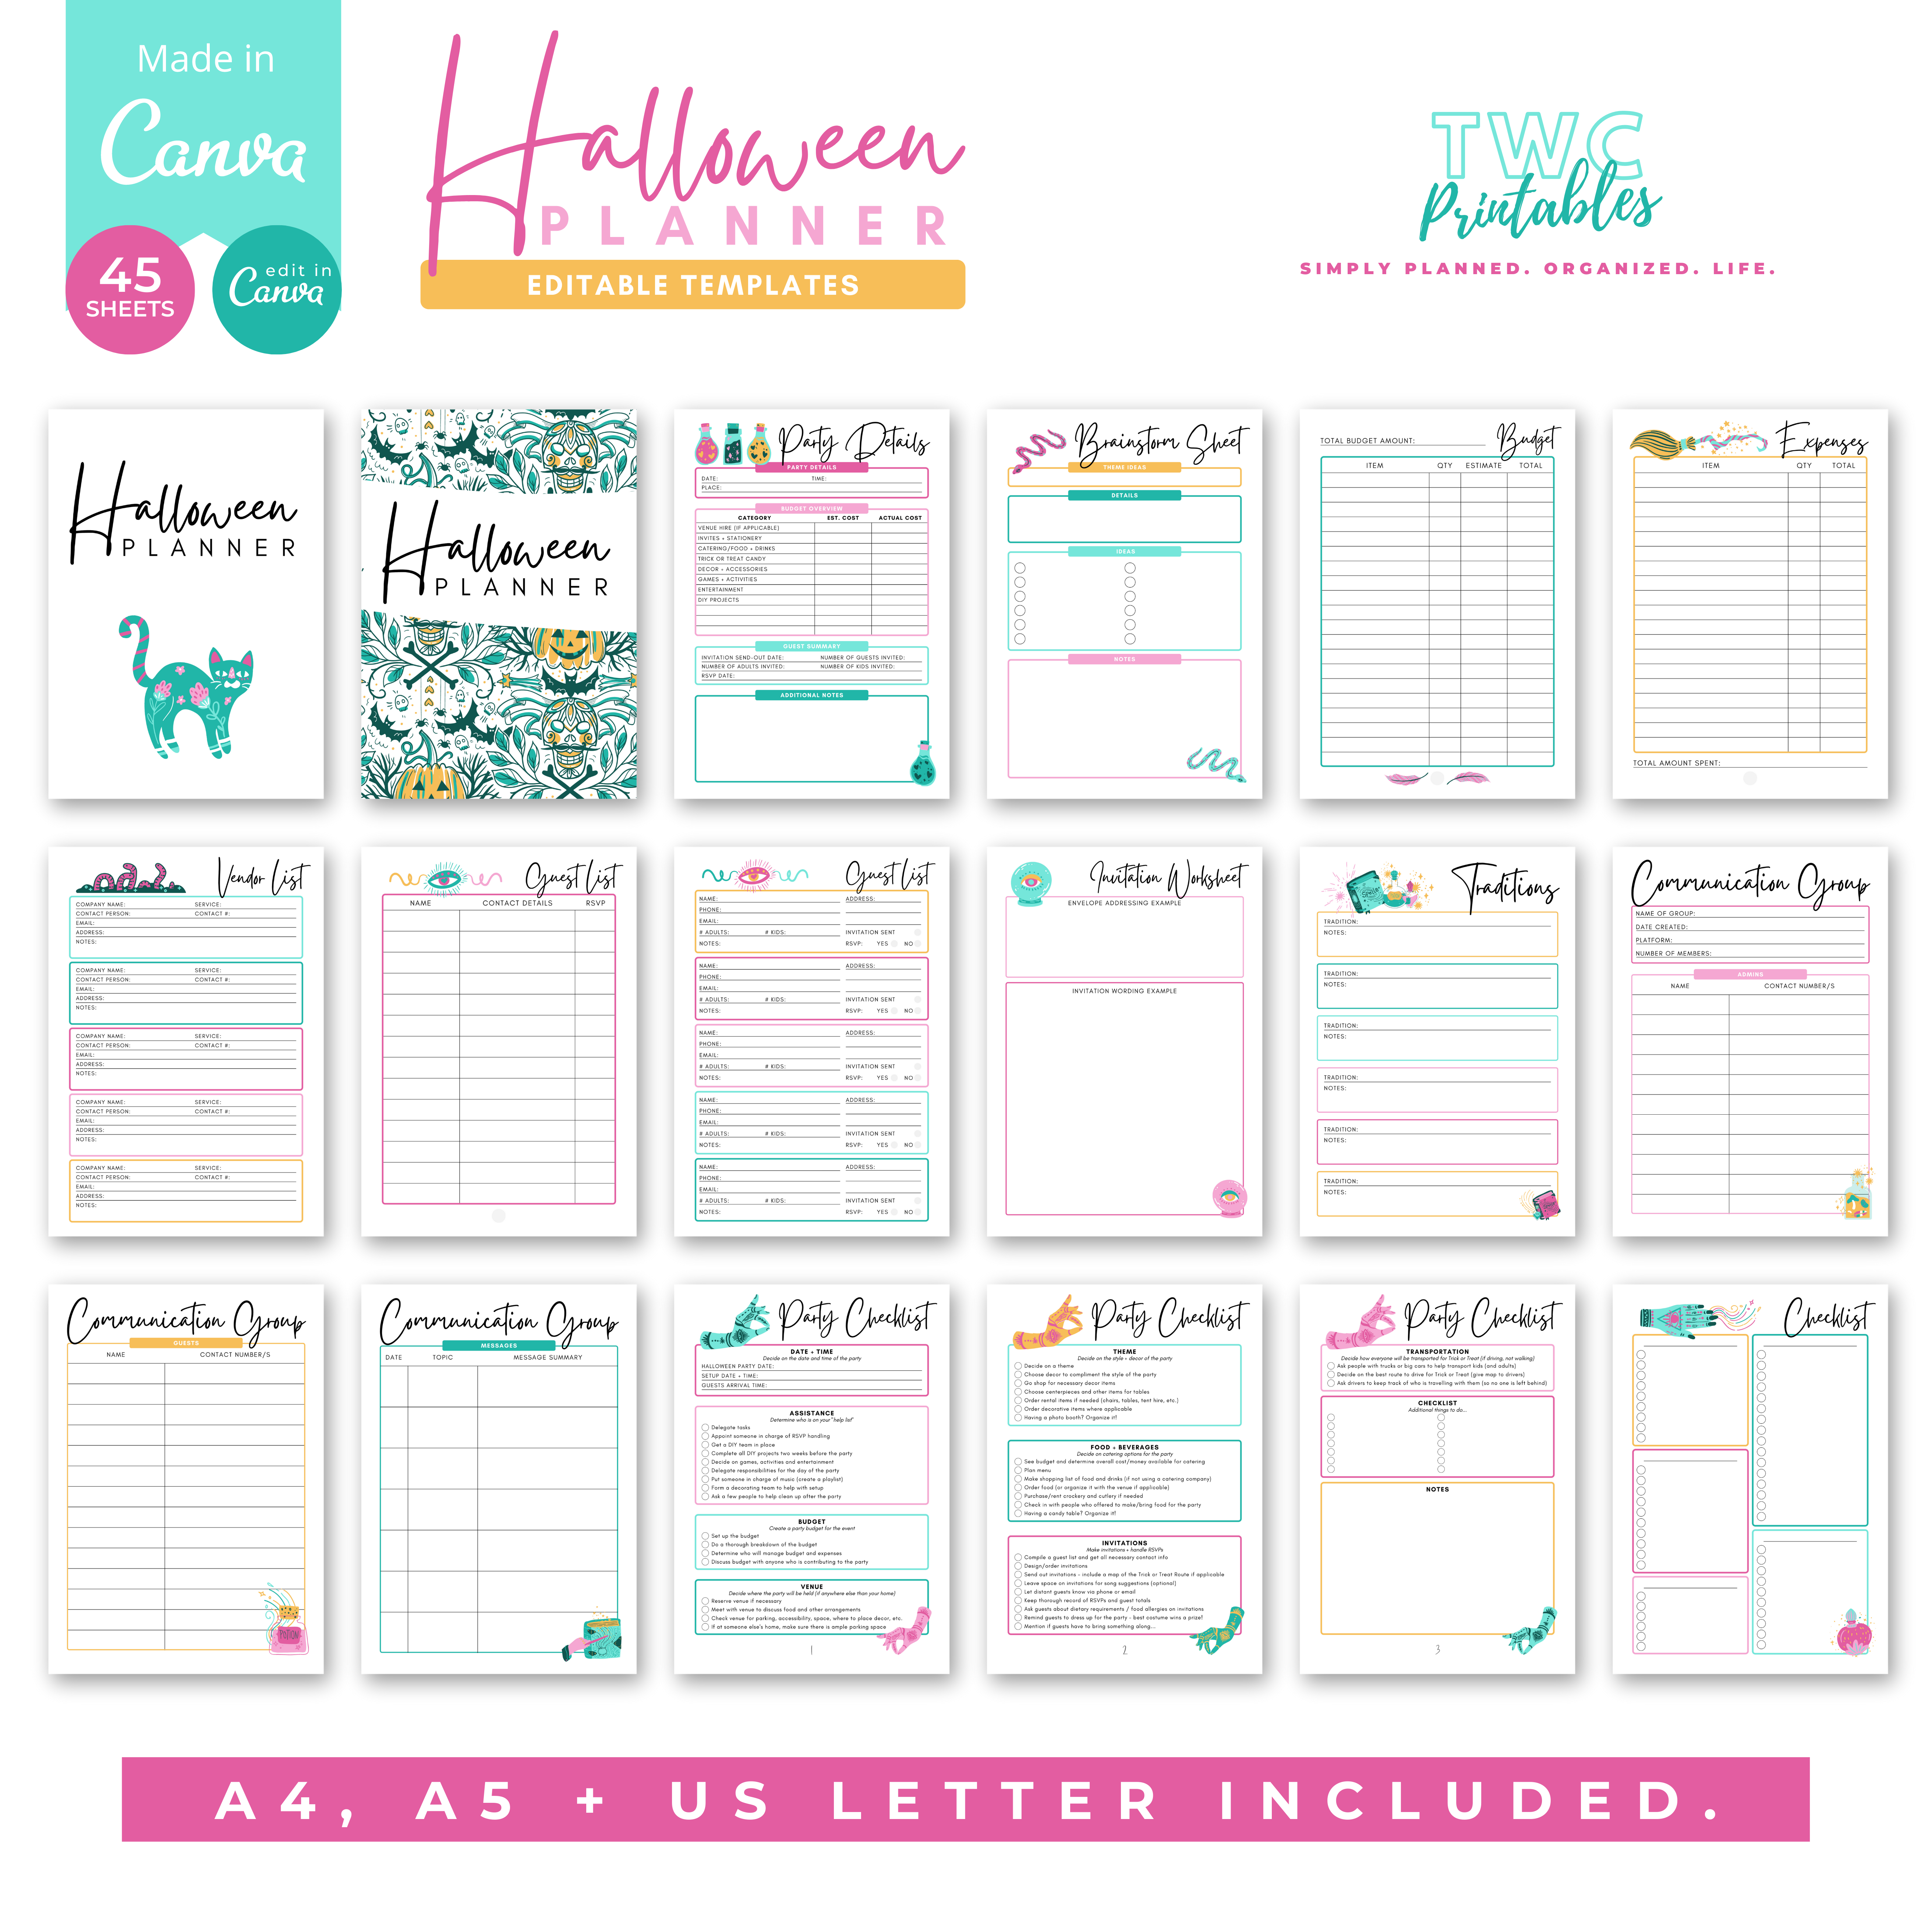 The ultimate Halloween party planner will help you to plan all aspects of this epic event - from Halloween costume planning and pumpkin carving ideas, to menu planning, guest list management, and more! Simply edit this template with the free version of Canva - you can change the entire design, including fonts, colors, elements, and much more! A free Canva guide for beginners is included in your purchase of this listing.